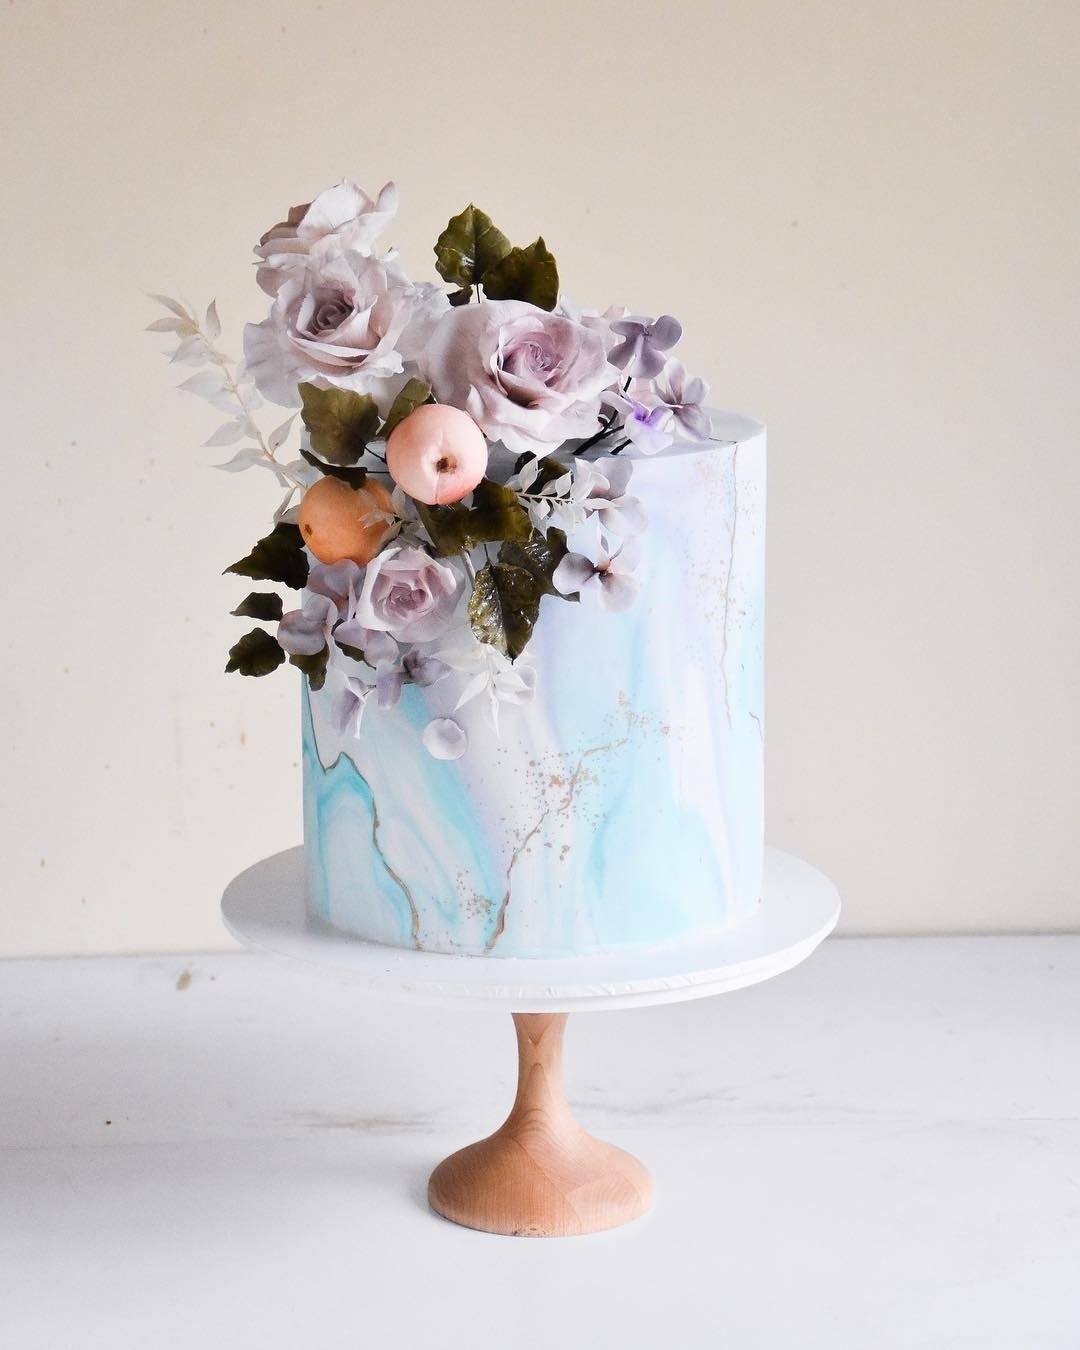 marble wedding cakes marble rustic wedding cakes fruits